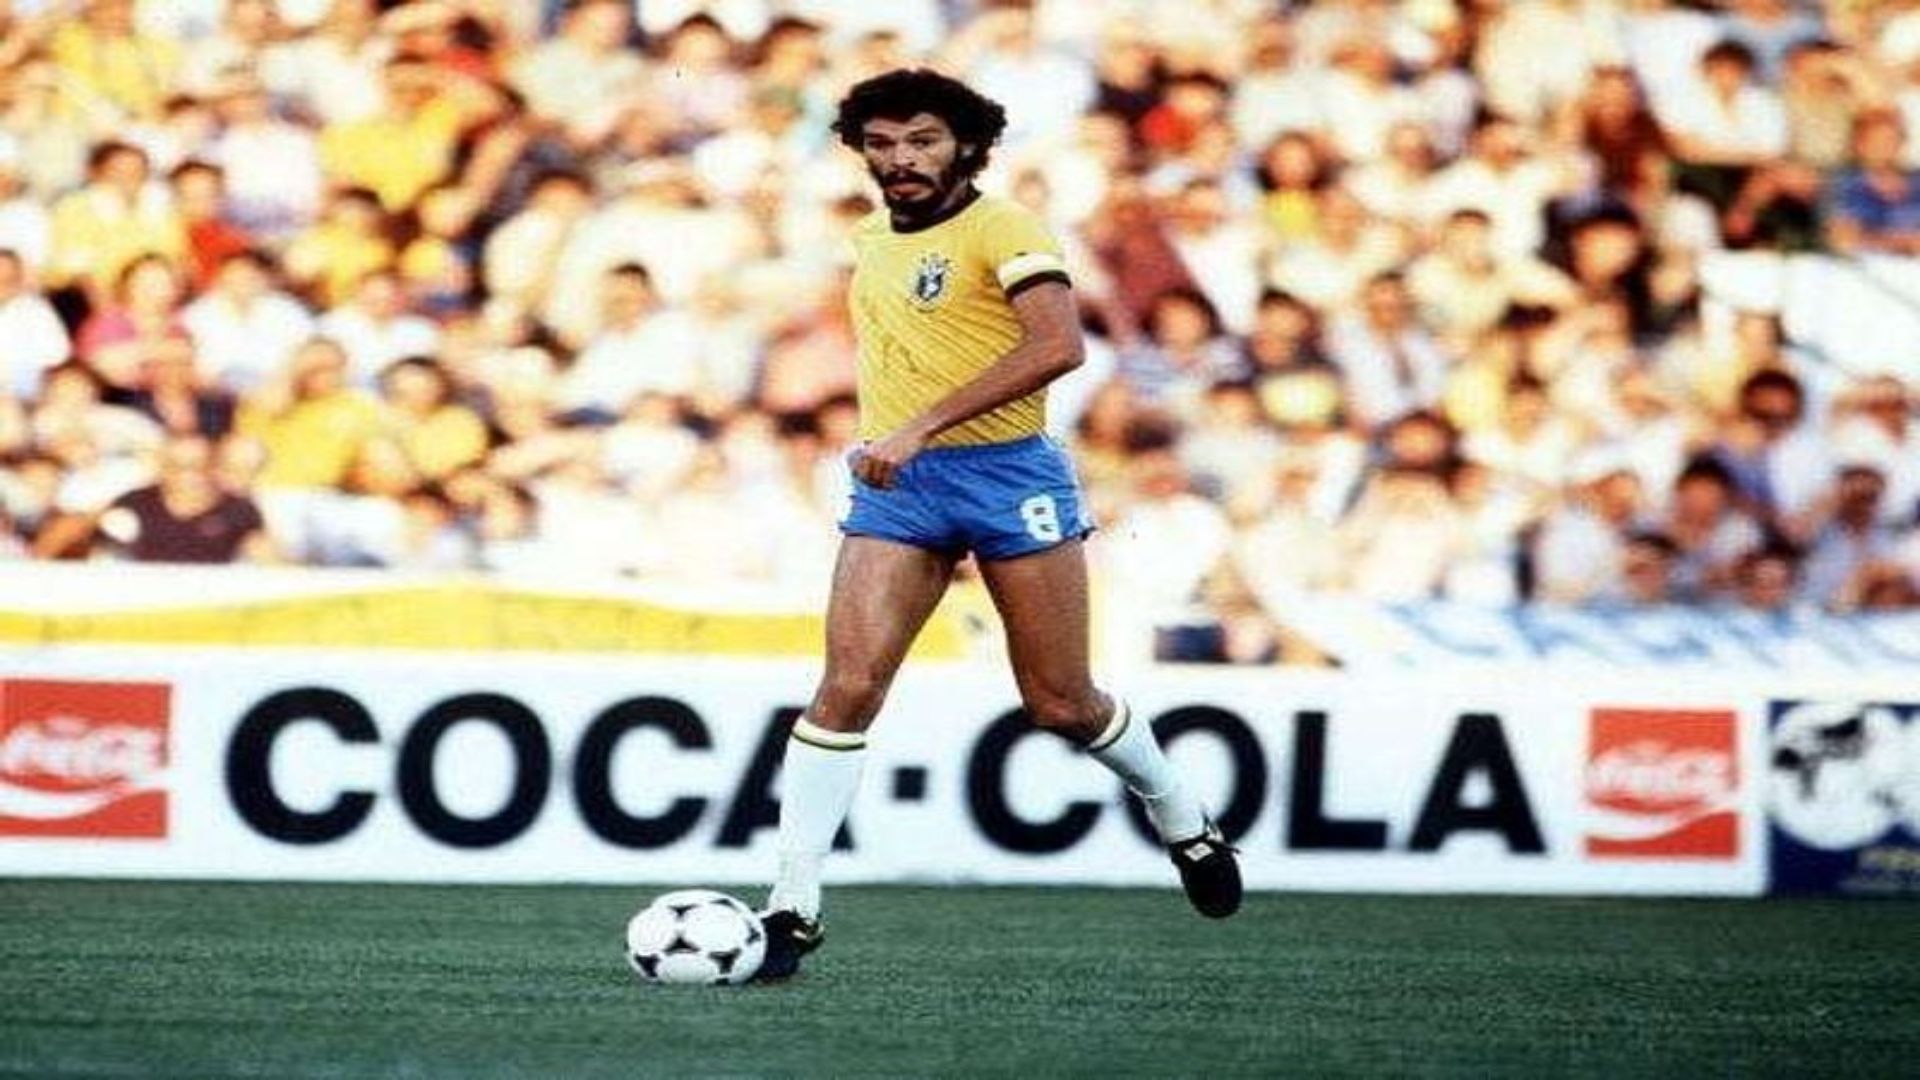 Socrates was one of the greatest holding midfielders ever.